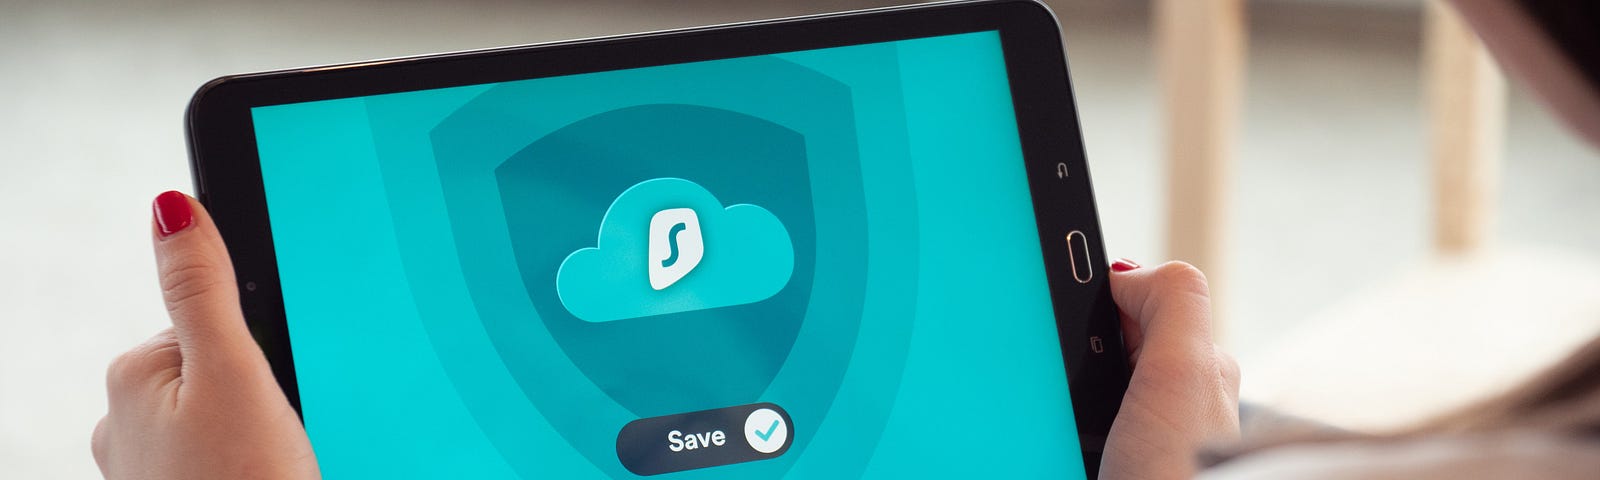 Someone, maybe a woman, with a tablet computer that says “Save” with a green check mark after Save. The blue background has a darker blue shield above the word Save and a lighter blue cloud-like shape on the shield.